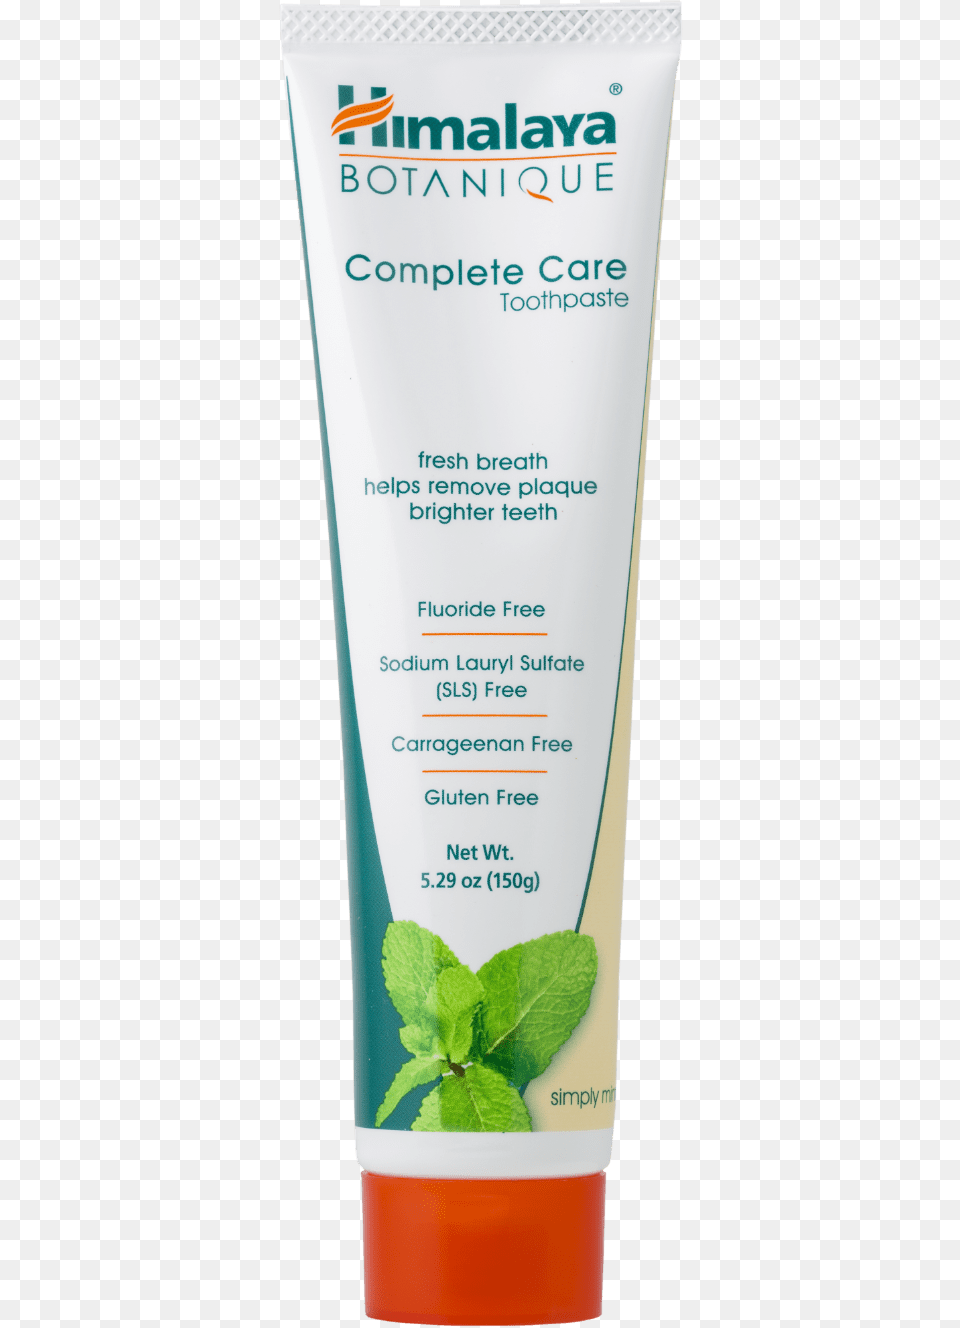 Simply Mint Complete Care Toothpaste Himalaya Toothpaste Fluoride, Bottle, Herbs, Plant, Lotion Png Image